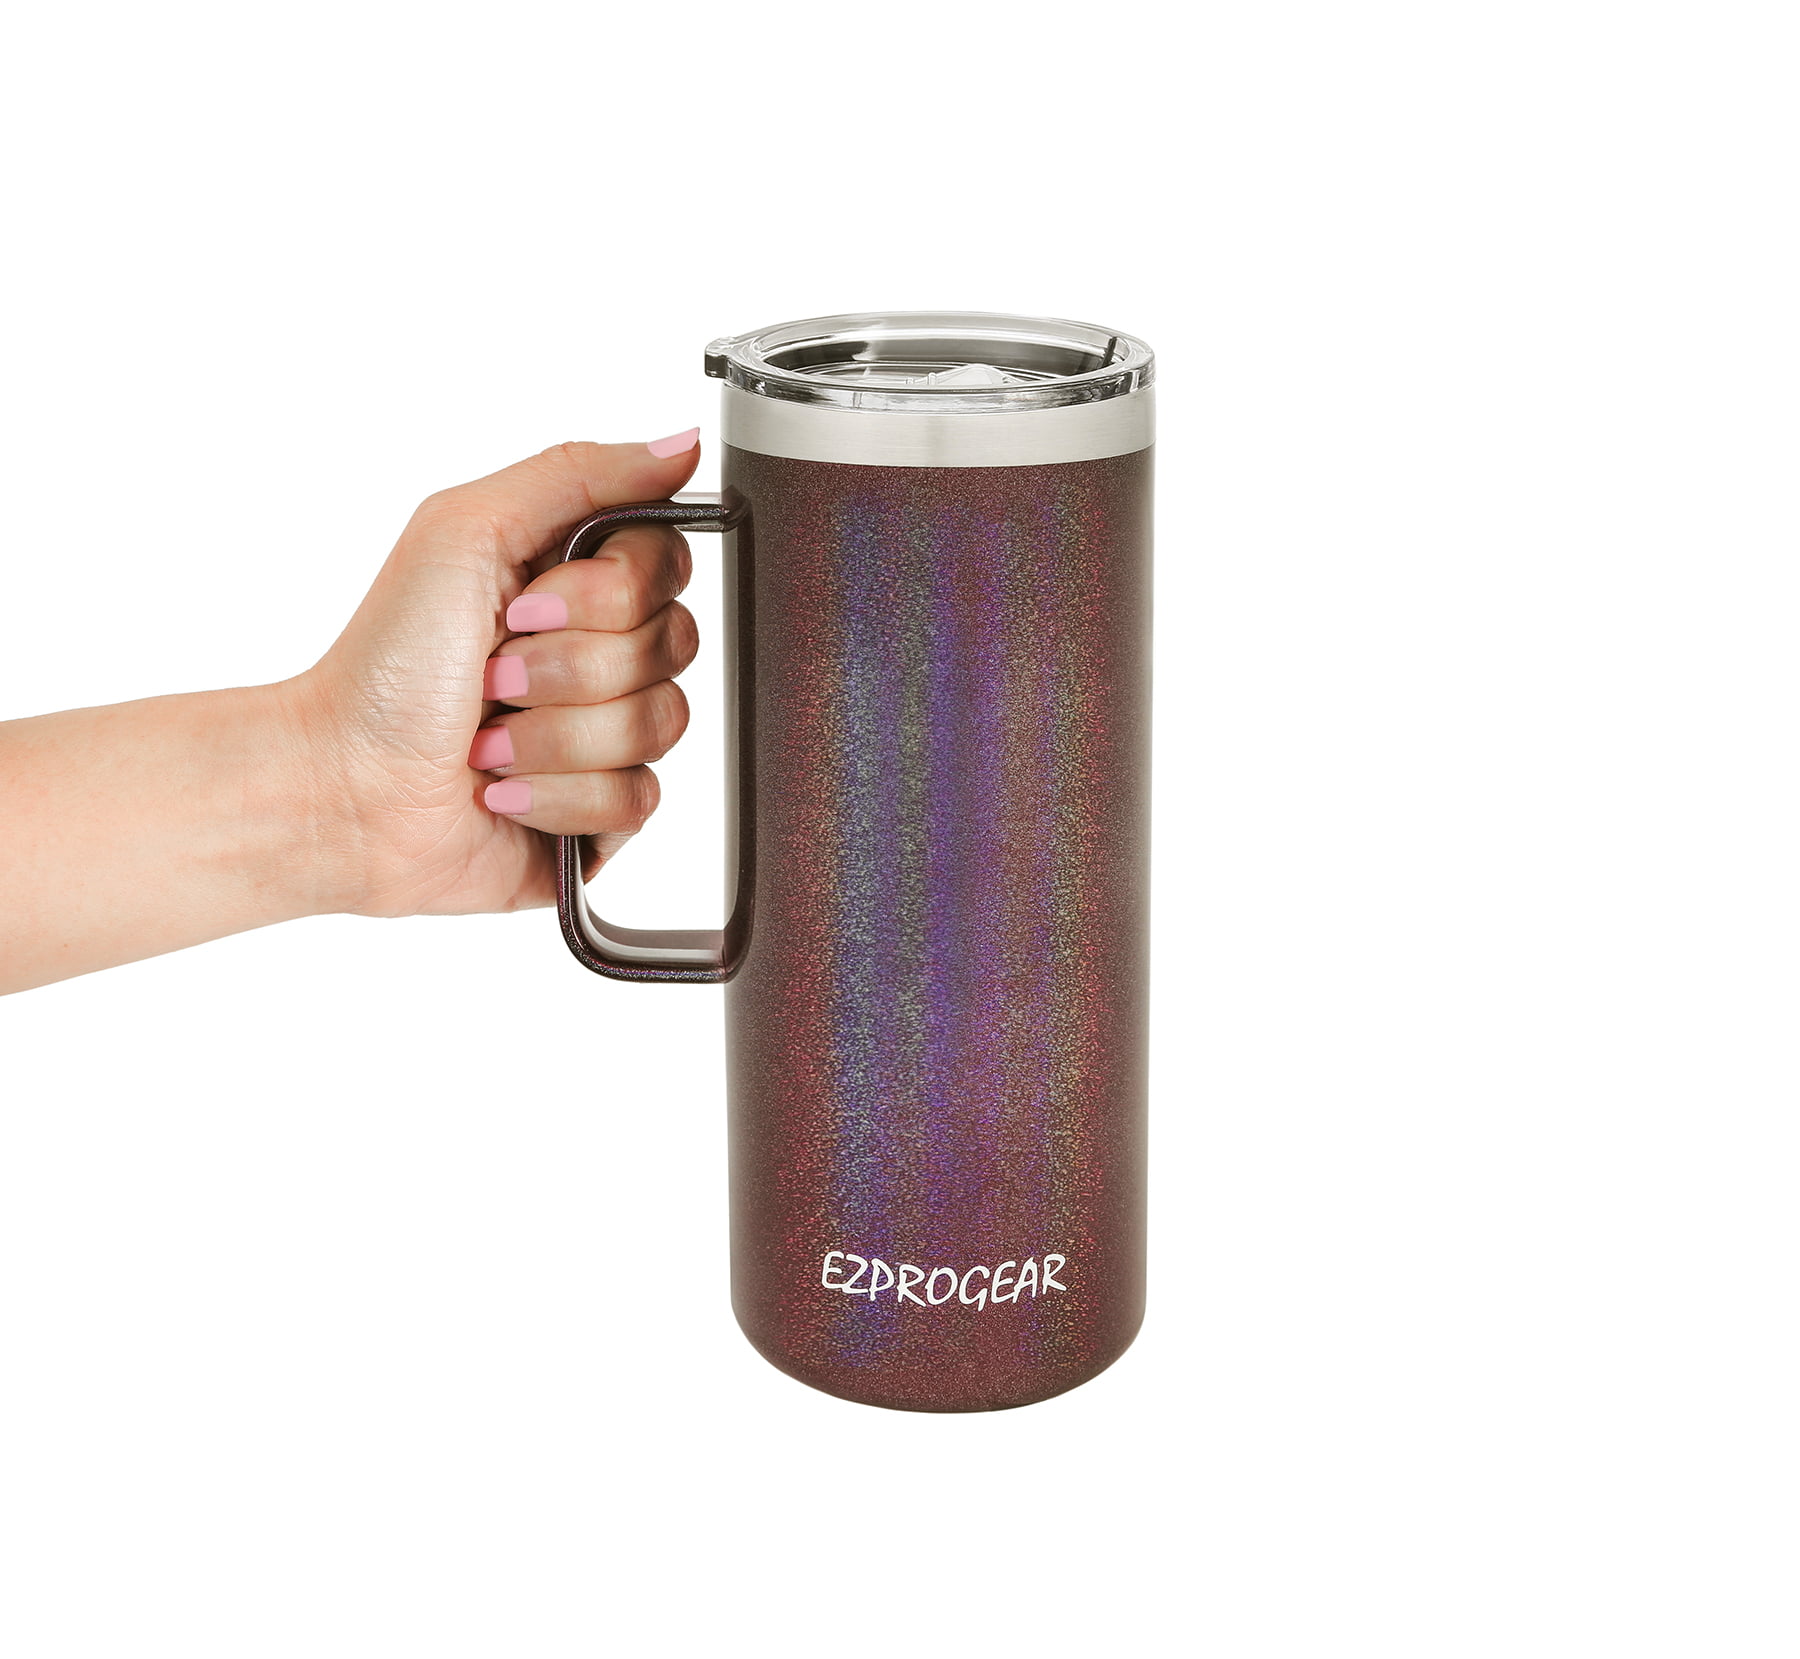 YIDEDE Stainless Steel Mug, Outdoor Simplicity Thermos Cup For